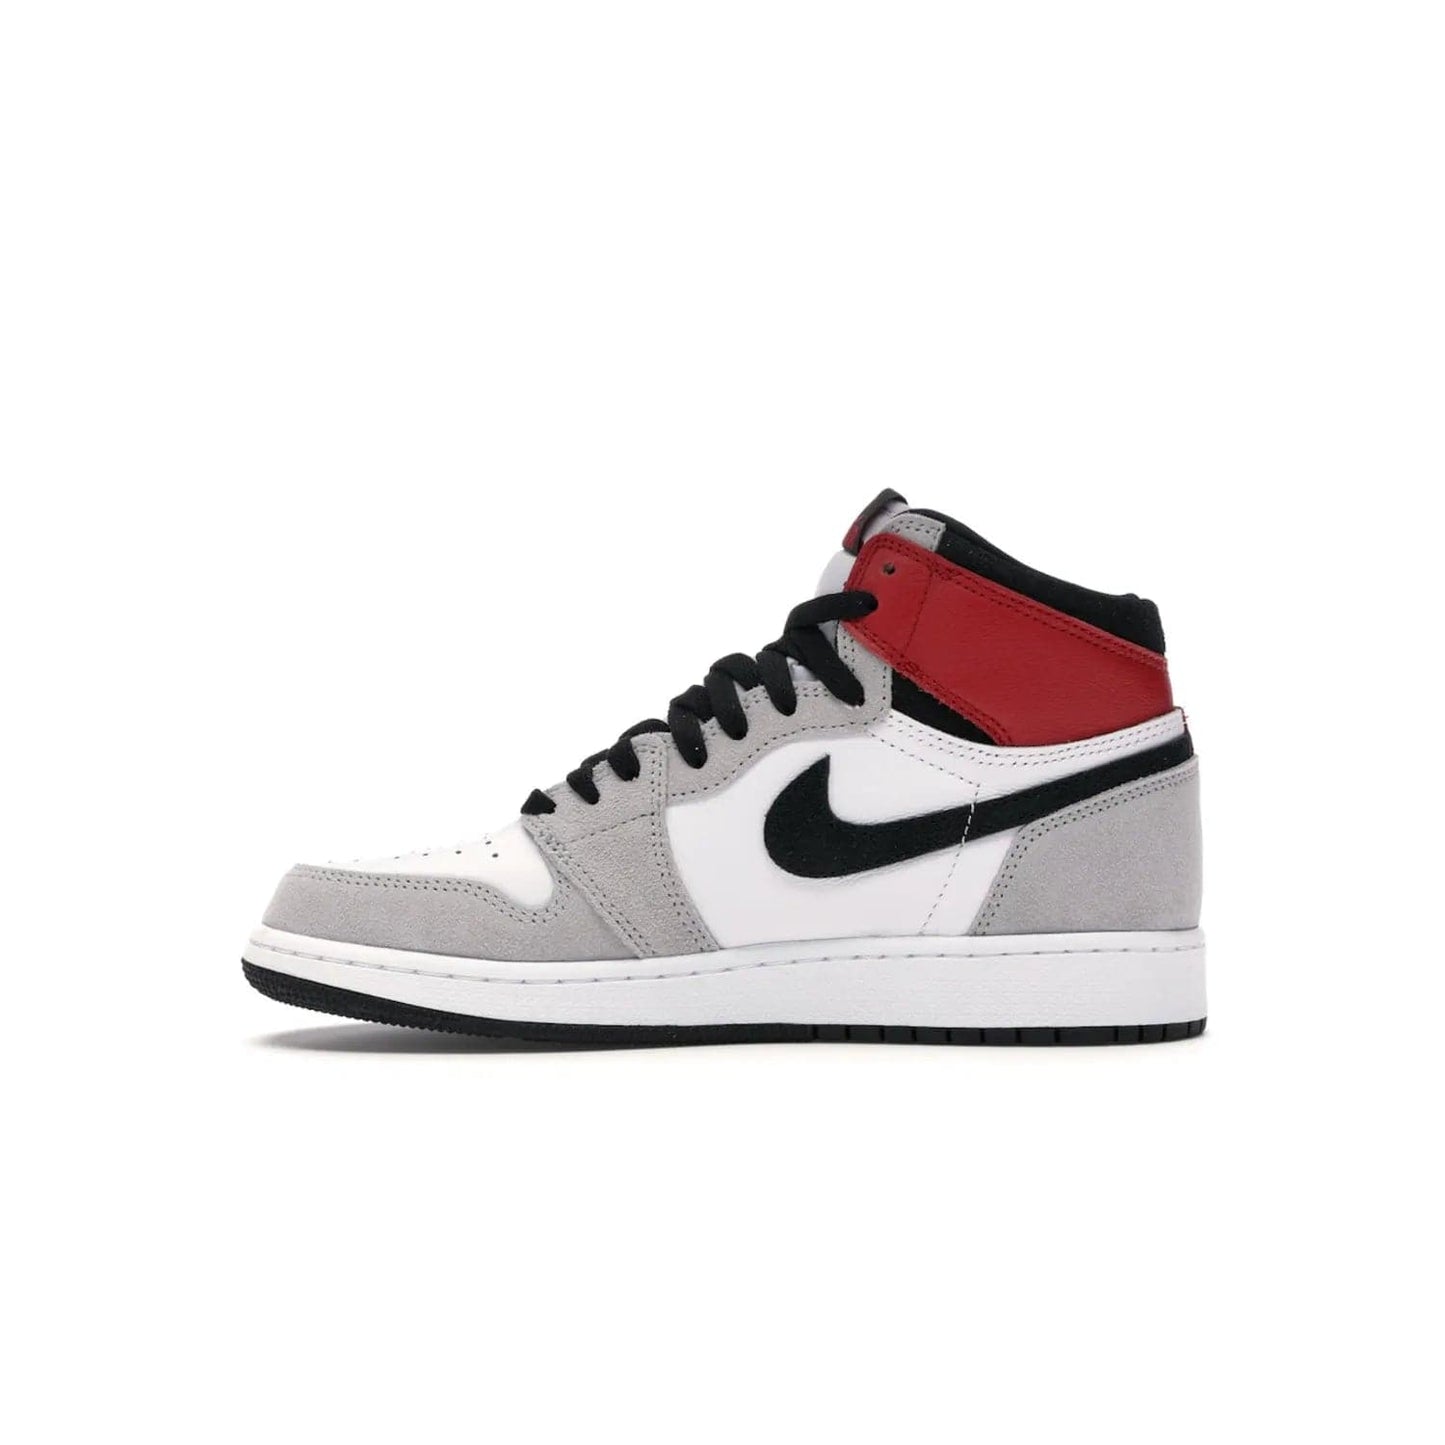 Jordan 1 Retro High Light Smoke Grey (GS) - Image 19 - Only at www.BallersClubKickz.com - Jordan 1 Retro High Light Smoke Grey (GS) features shades of grey, black, and Varsity Red with a bold silhouette. Premium white leather and suede overlays create a unique look. Released July 2020, offering style and performance. Perfect sneaker for any collector or fan.